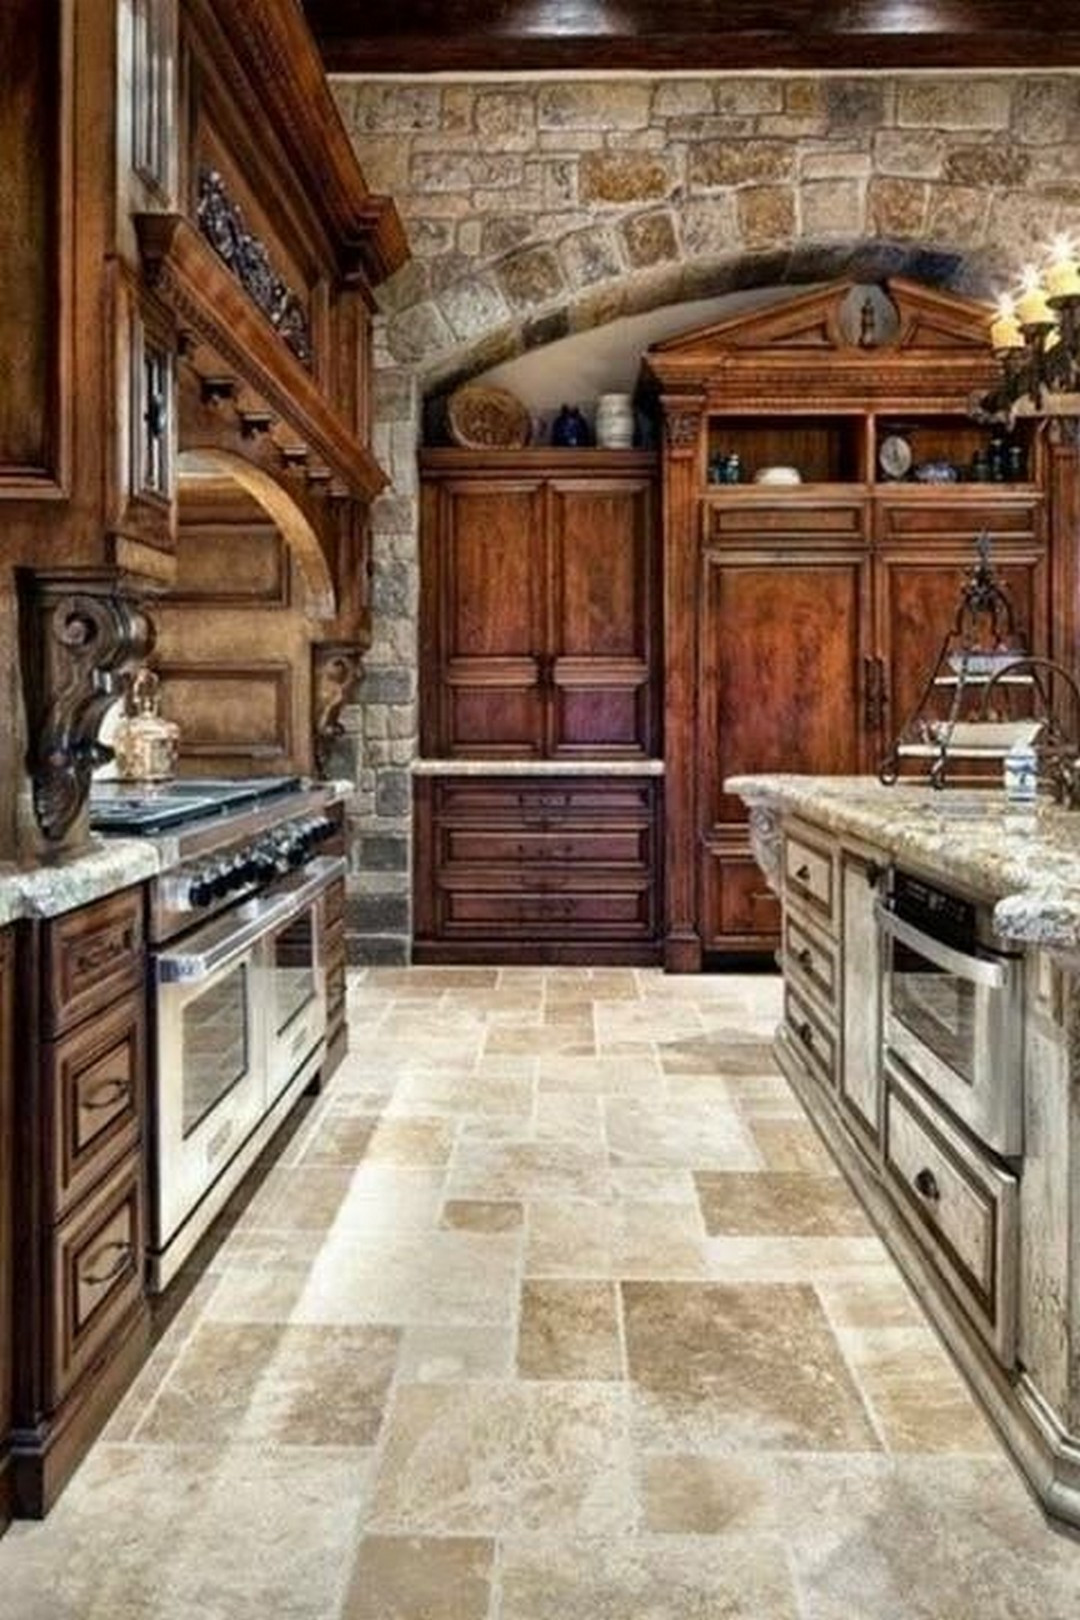 The Rustic Kitchen
 Renew your Ordinary Kitchen with These Inspiring Rustic